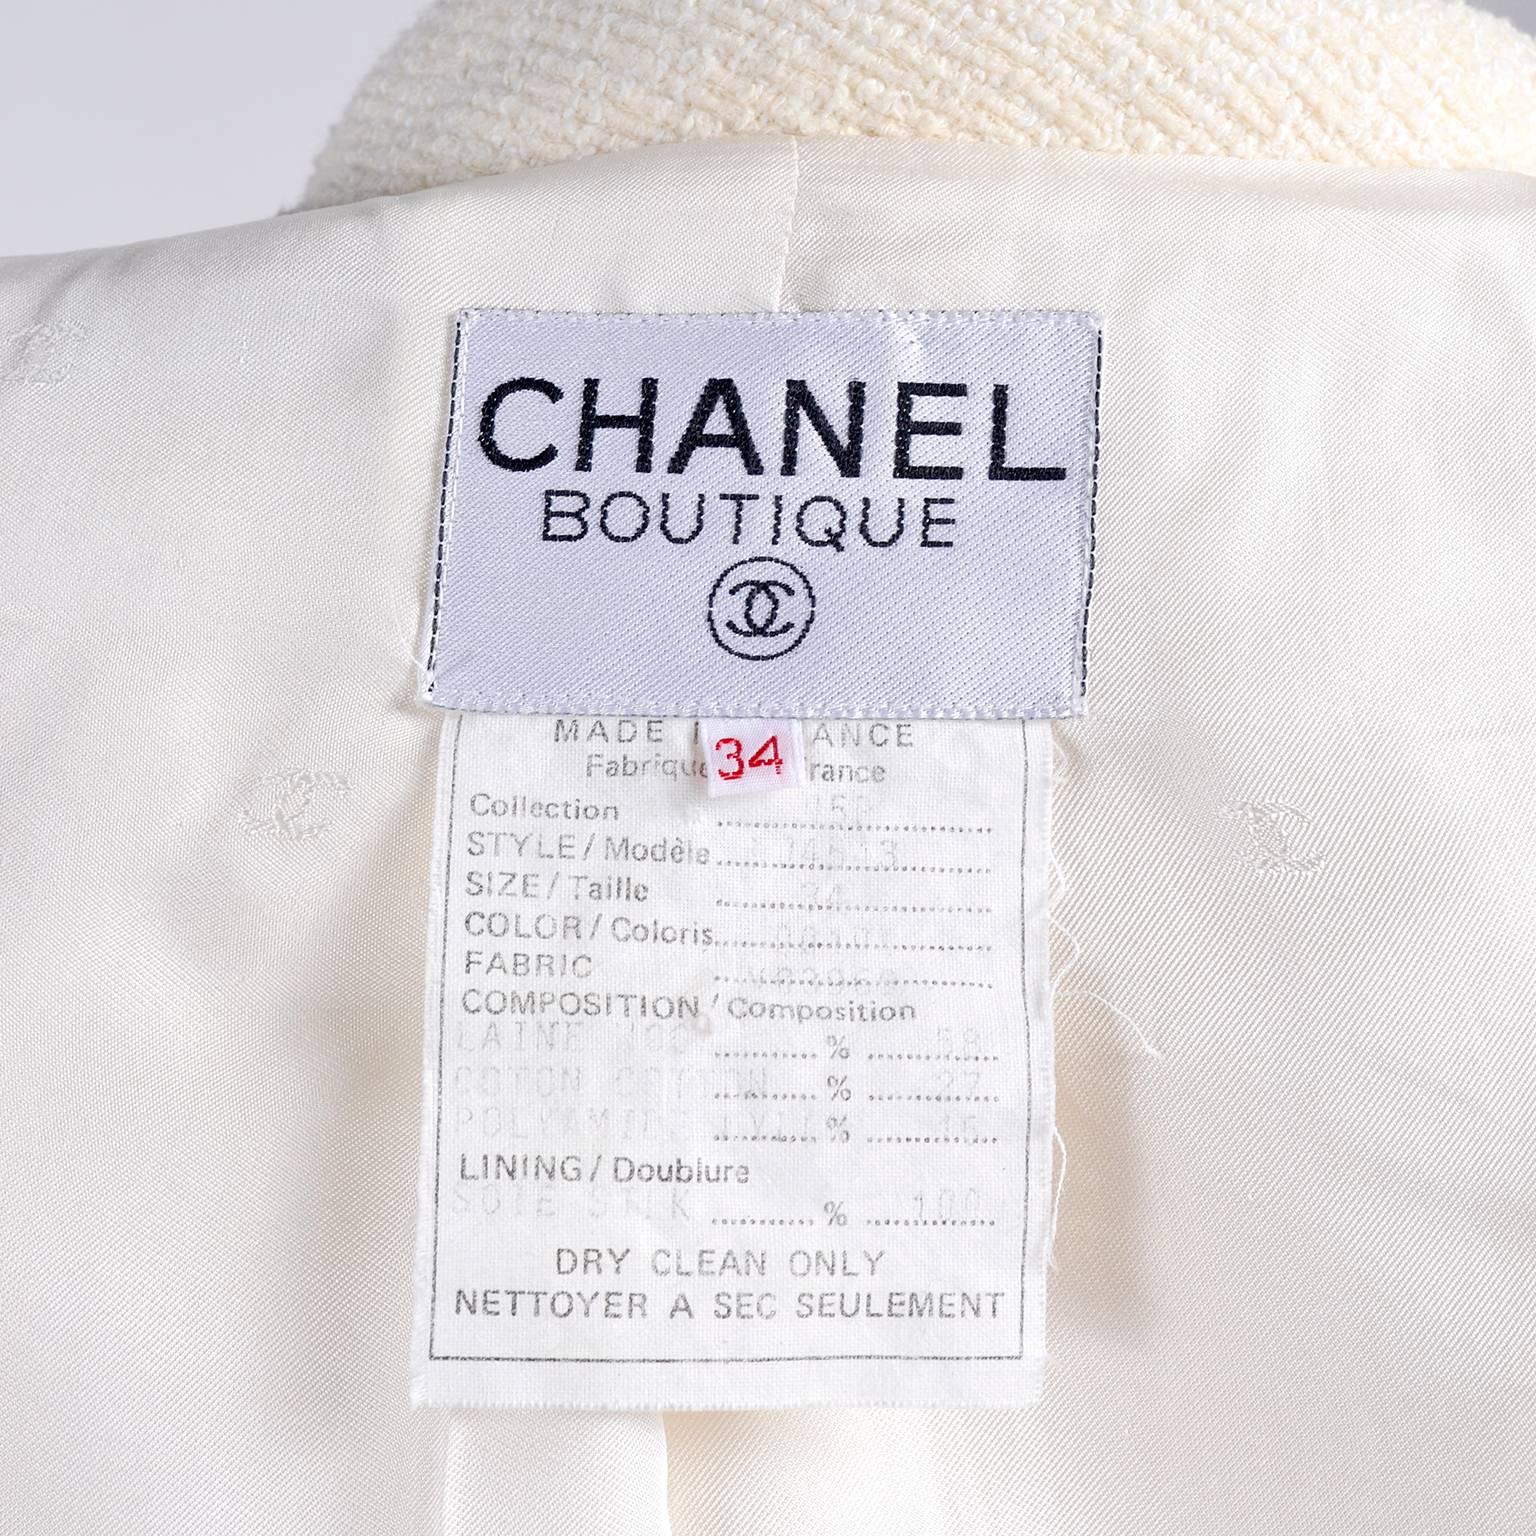 Women's Chanel Creamy Ivory Tweed Wool Blazer Jacket with Logo Buttons and Silk Lining